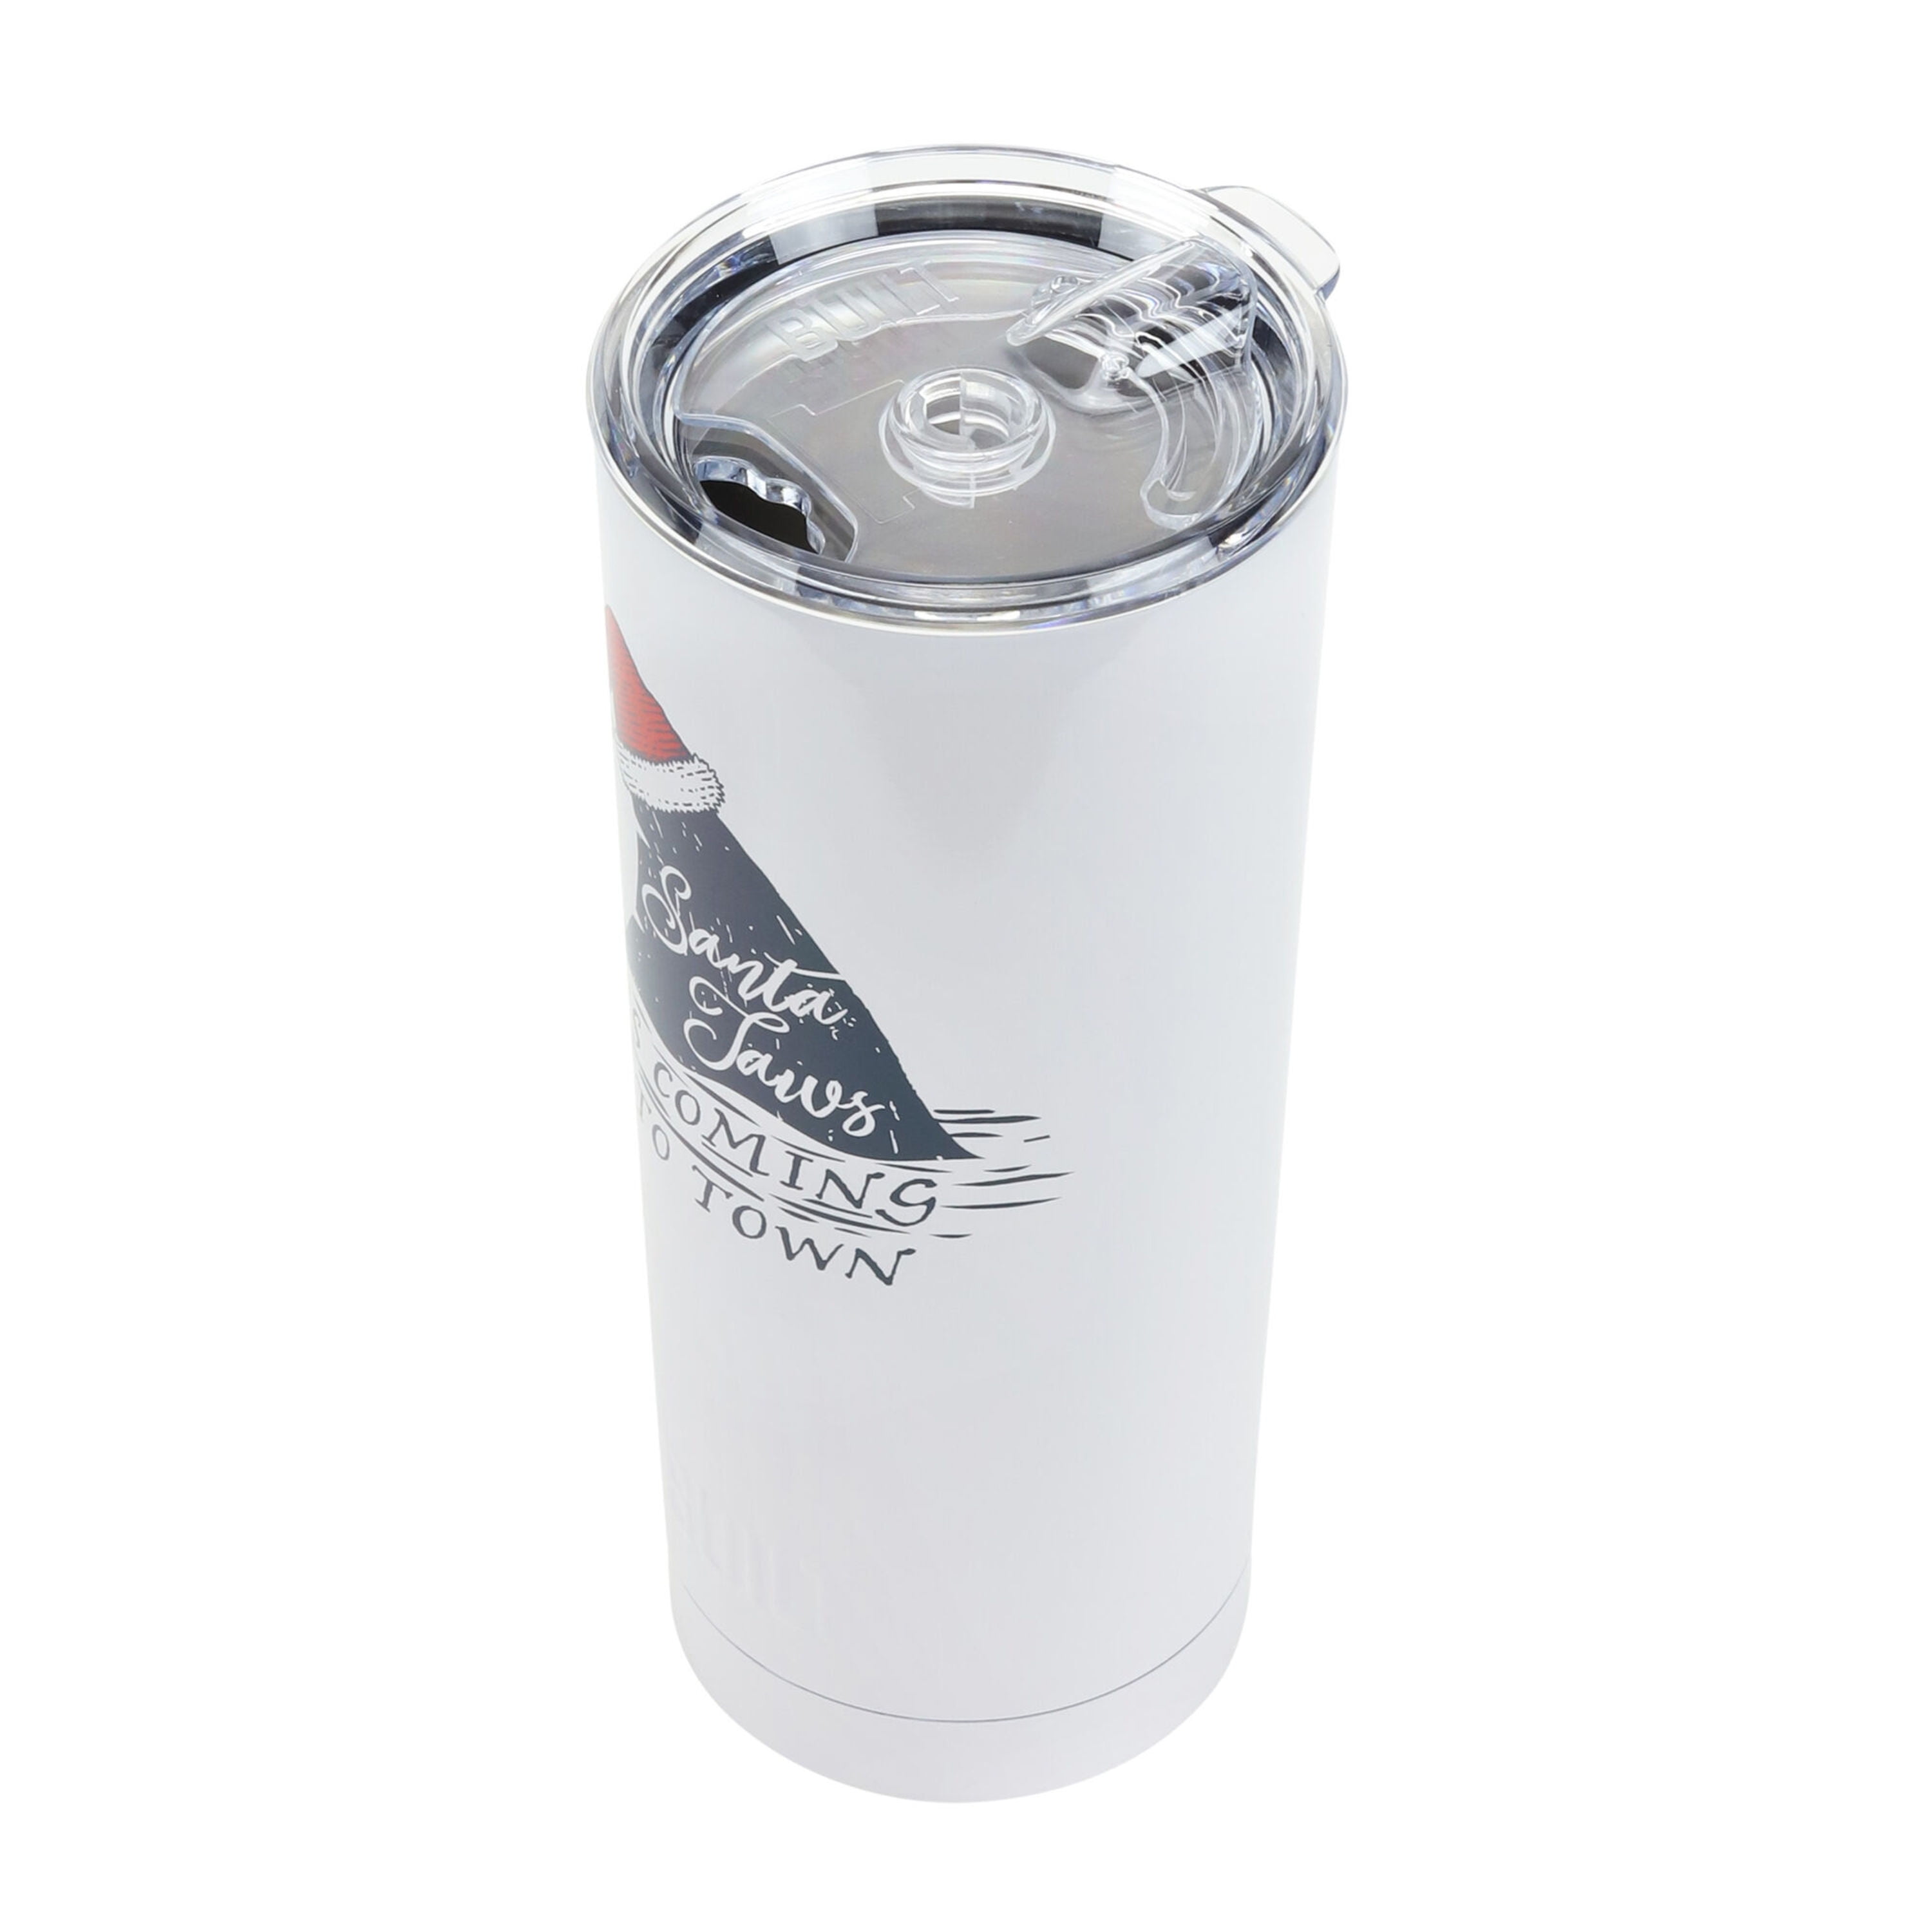 PBS NEWSHOUR 16 oz Tumbler with Stainless Straw